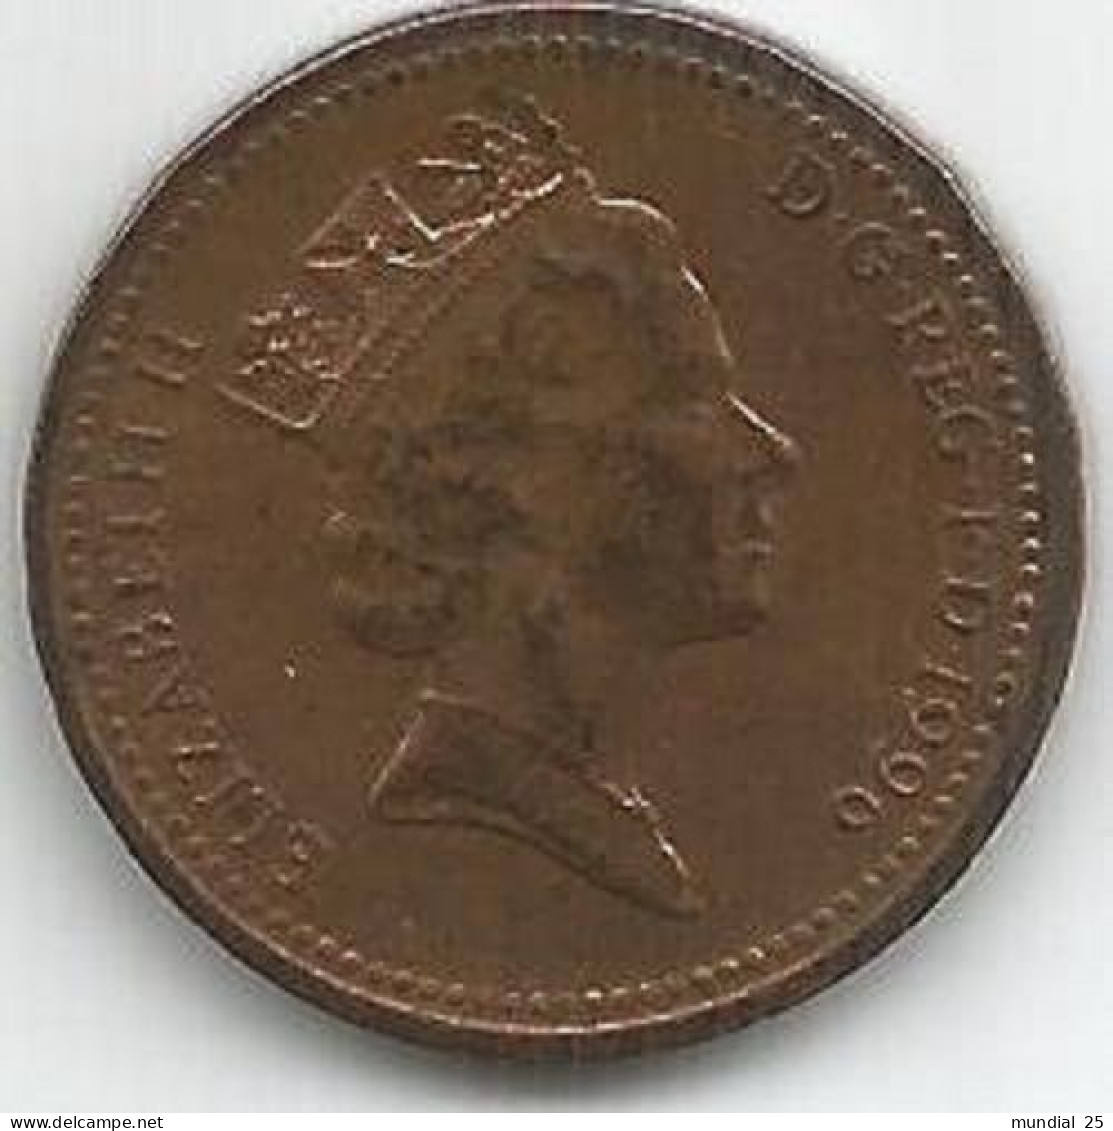 GREAT BRITAIN 1 PENNY 1996 - 1 Penny & 1 New Penny